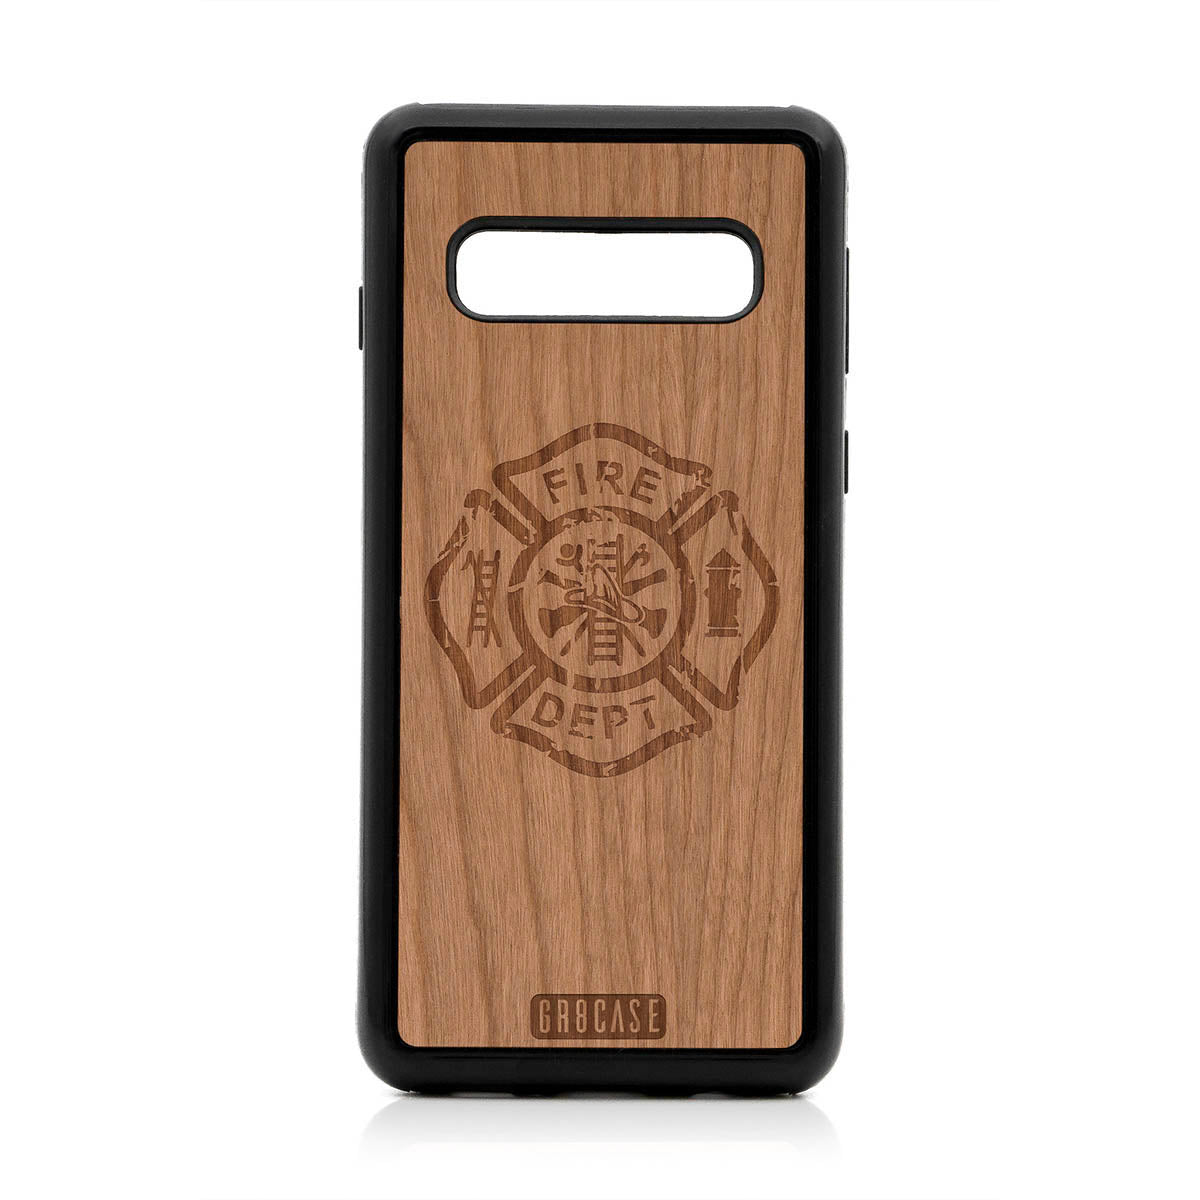 Fire Department Design Wood Case For Samsung Galaxy S10 by GR8CASE